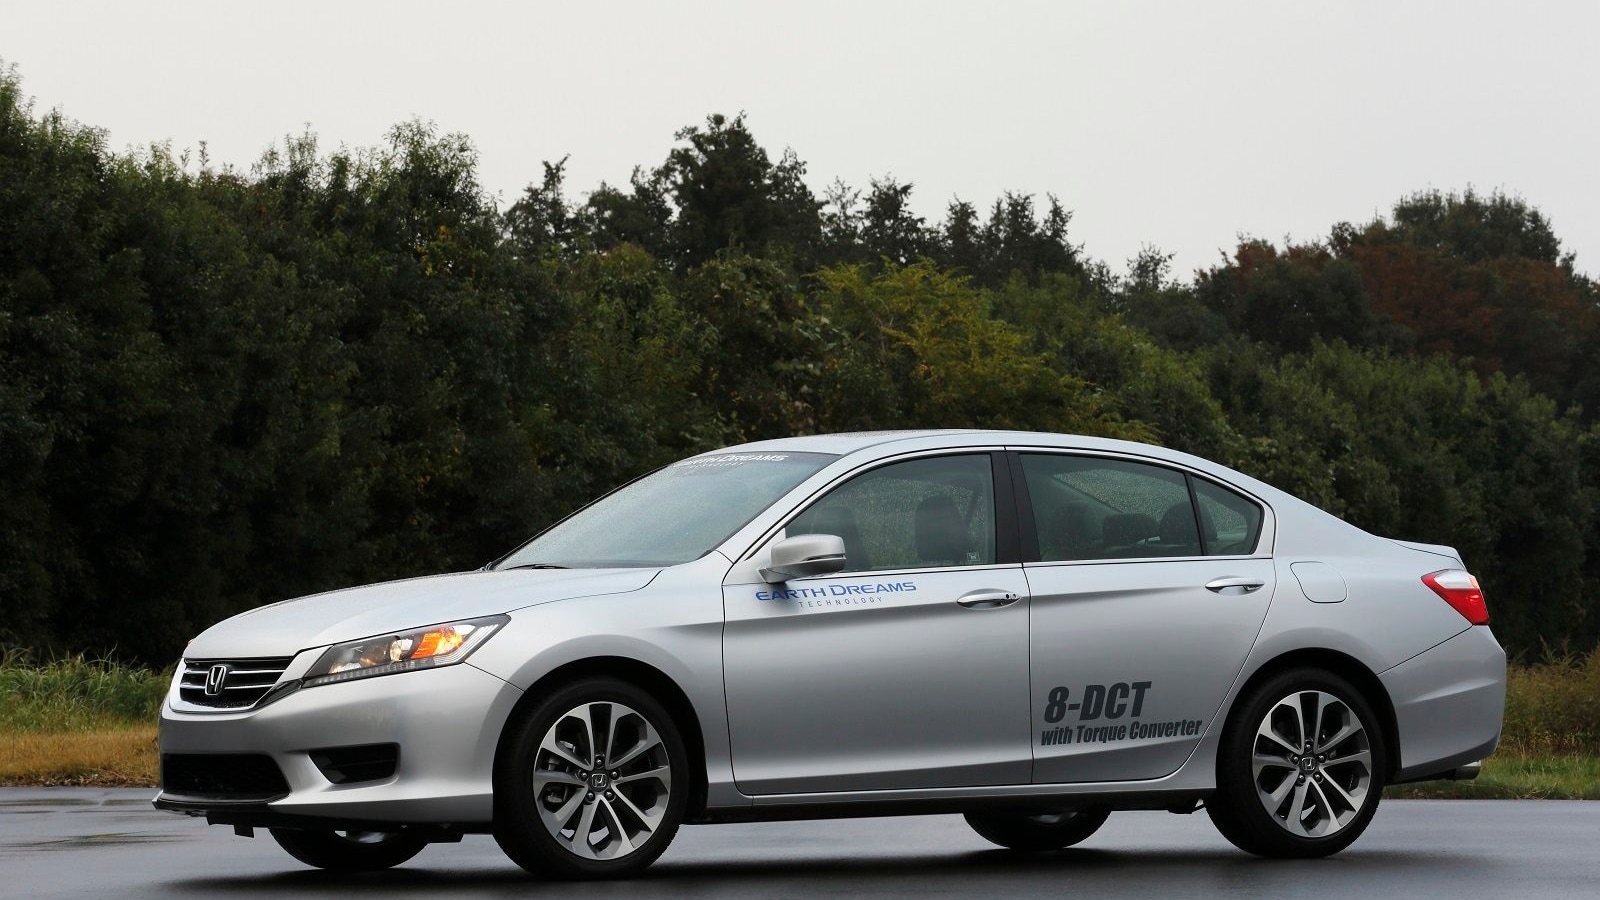 Honda Accord fitted with prototype Honda eight-speed dual-clutch transmission with torque converter